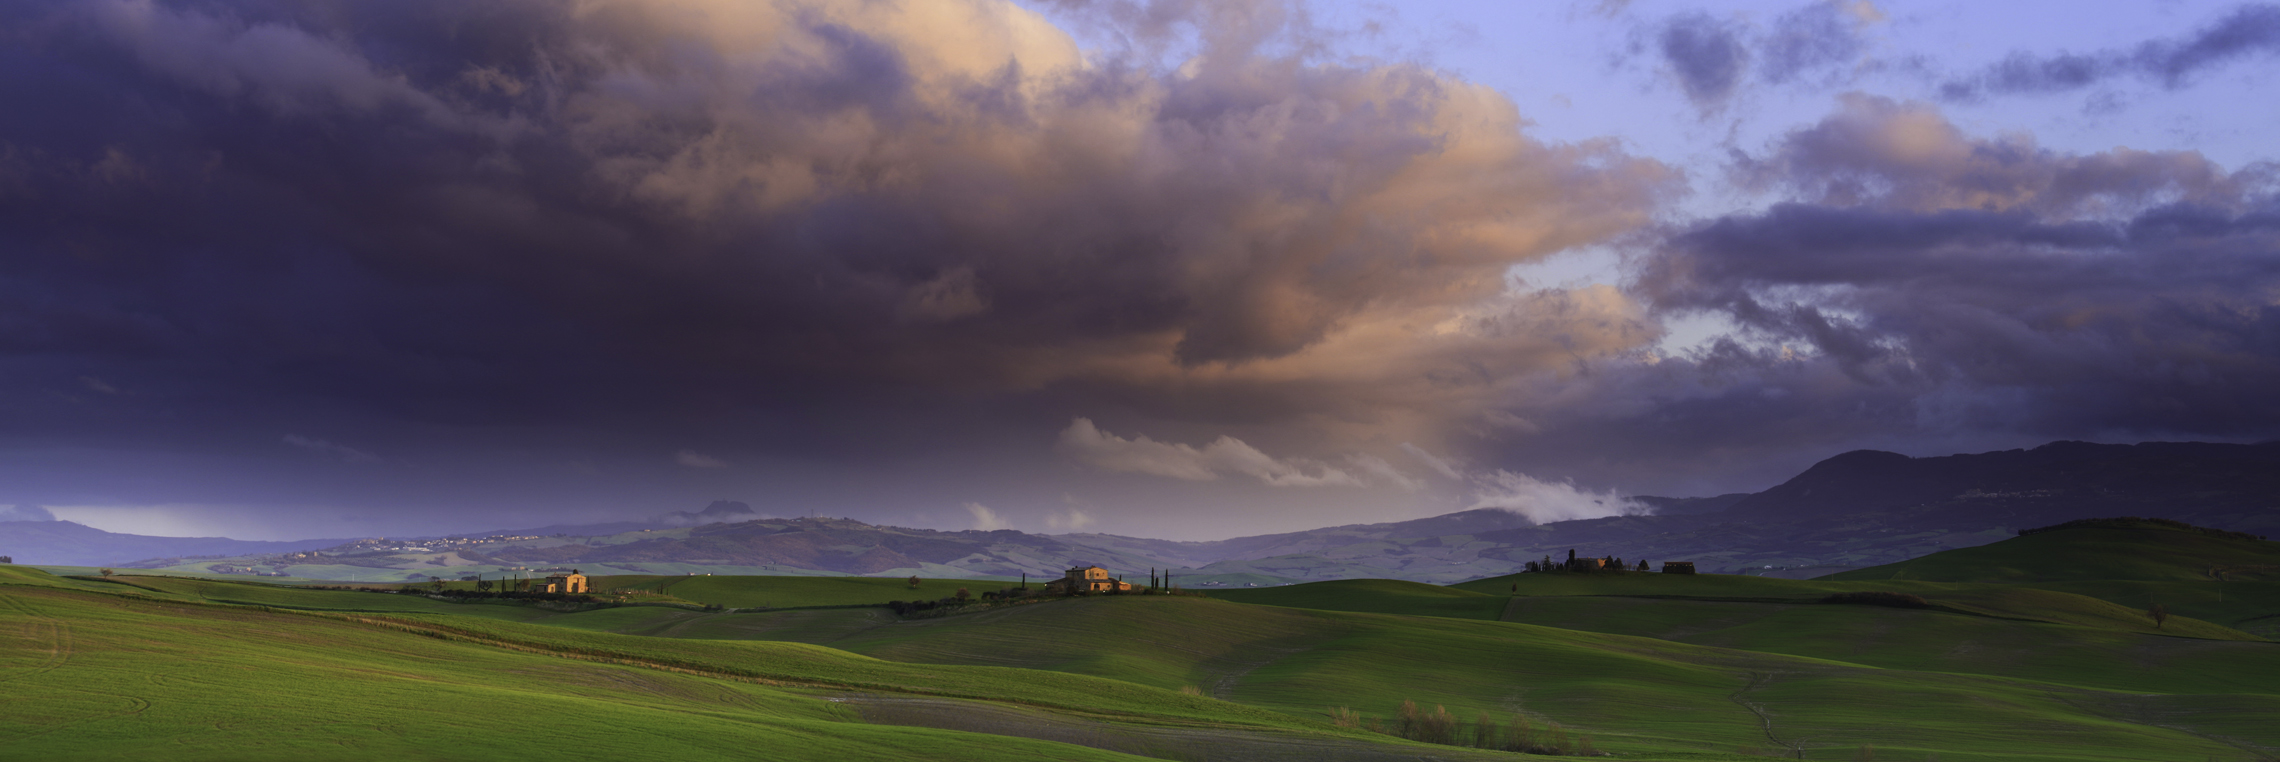 Tuscany - Val d'Orcia...